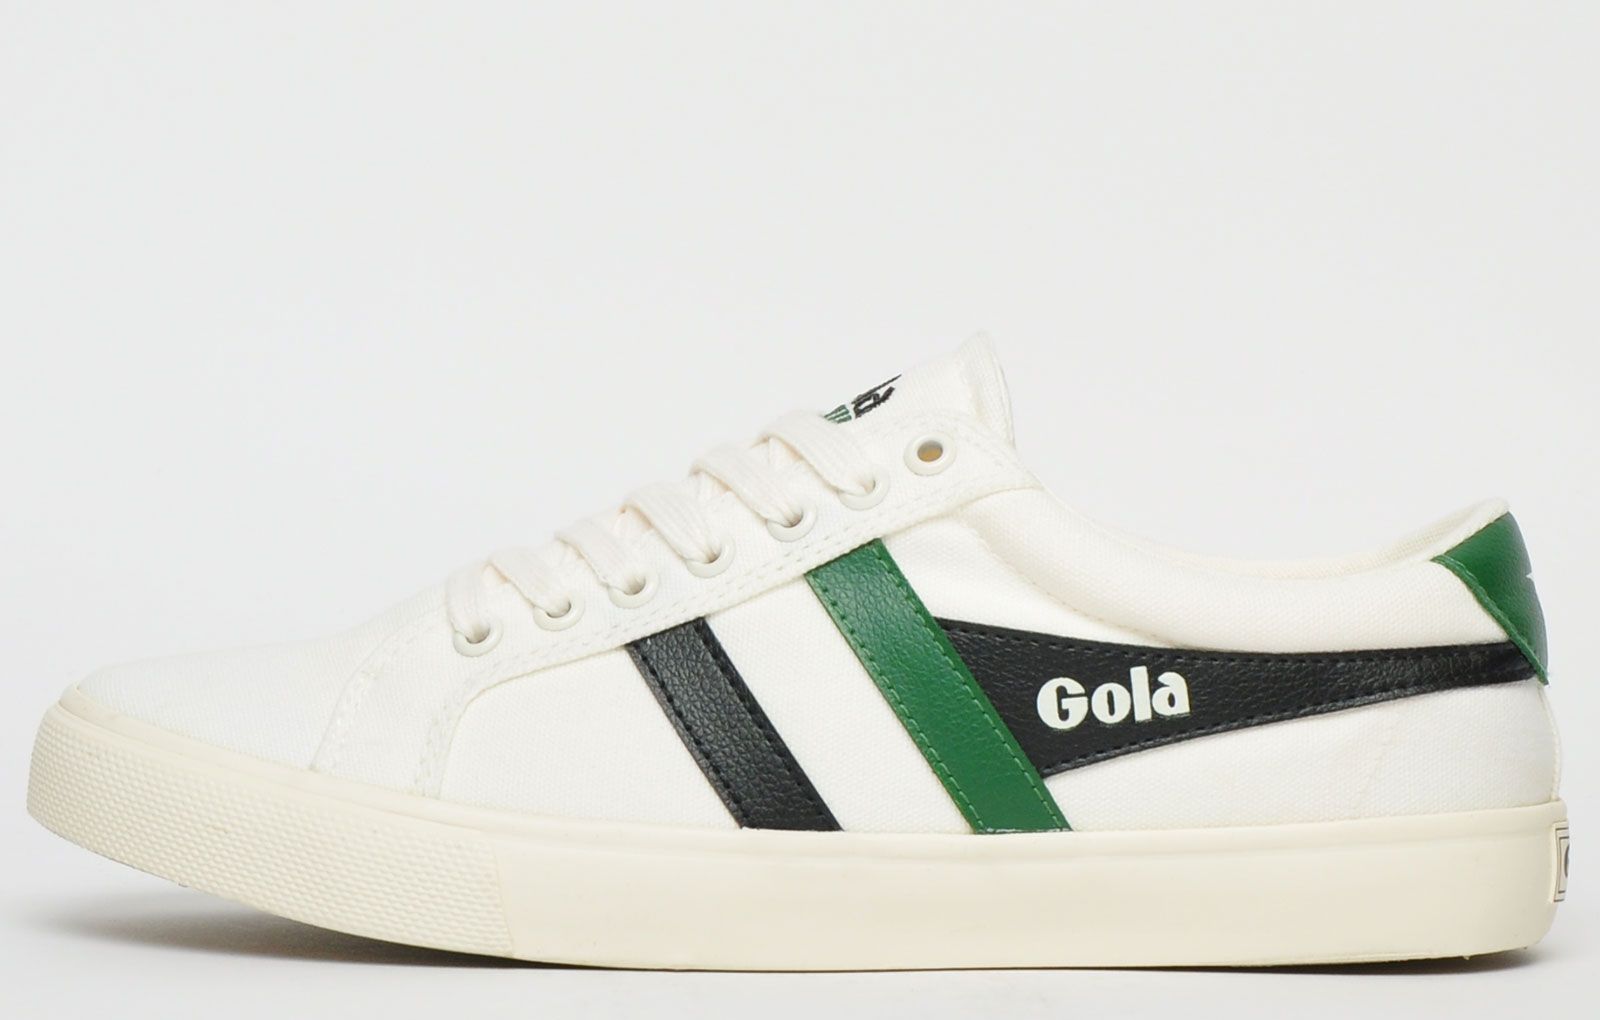 Born in Britain in 1905, Gola holds its British Heritage close to its heart. Gola has been associated with numerous high profile sporting legends over the years and was the number 1 British Sportwear brand of the 1960`s and 70`s. Gola still produces some of the most iconic trainers of today and yester years too by reaching back into its archives to deliver authentic retro styling with occasionally a flavour of modern aesthetics. Gola creates footwear for those who choose not to follow the crowd and who want to stay true to the vintage retro trainer look. <p class=